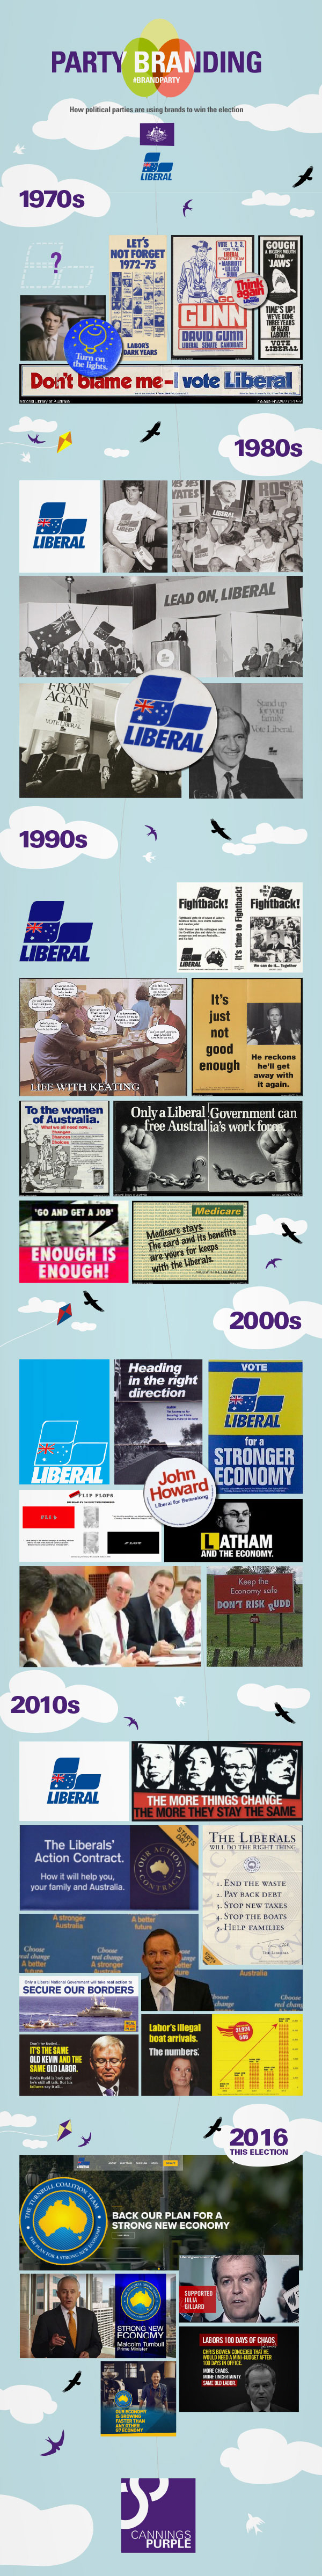 A short history of the Australian Liberal Party political branding.